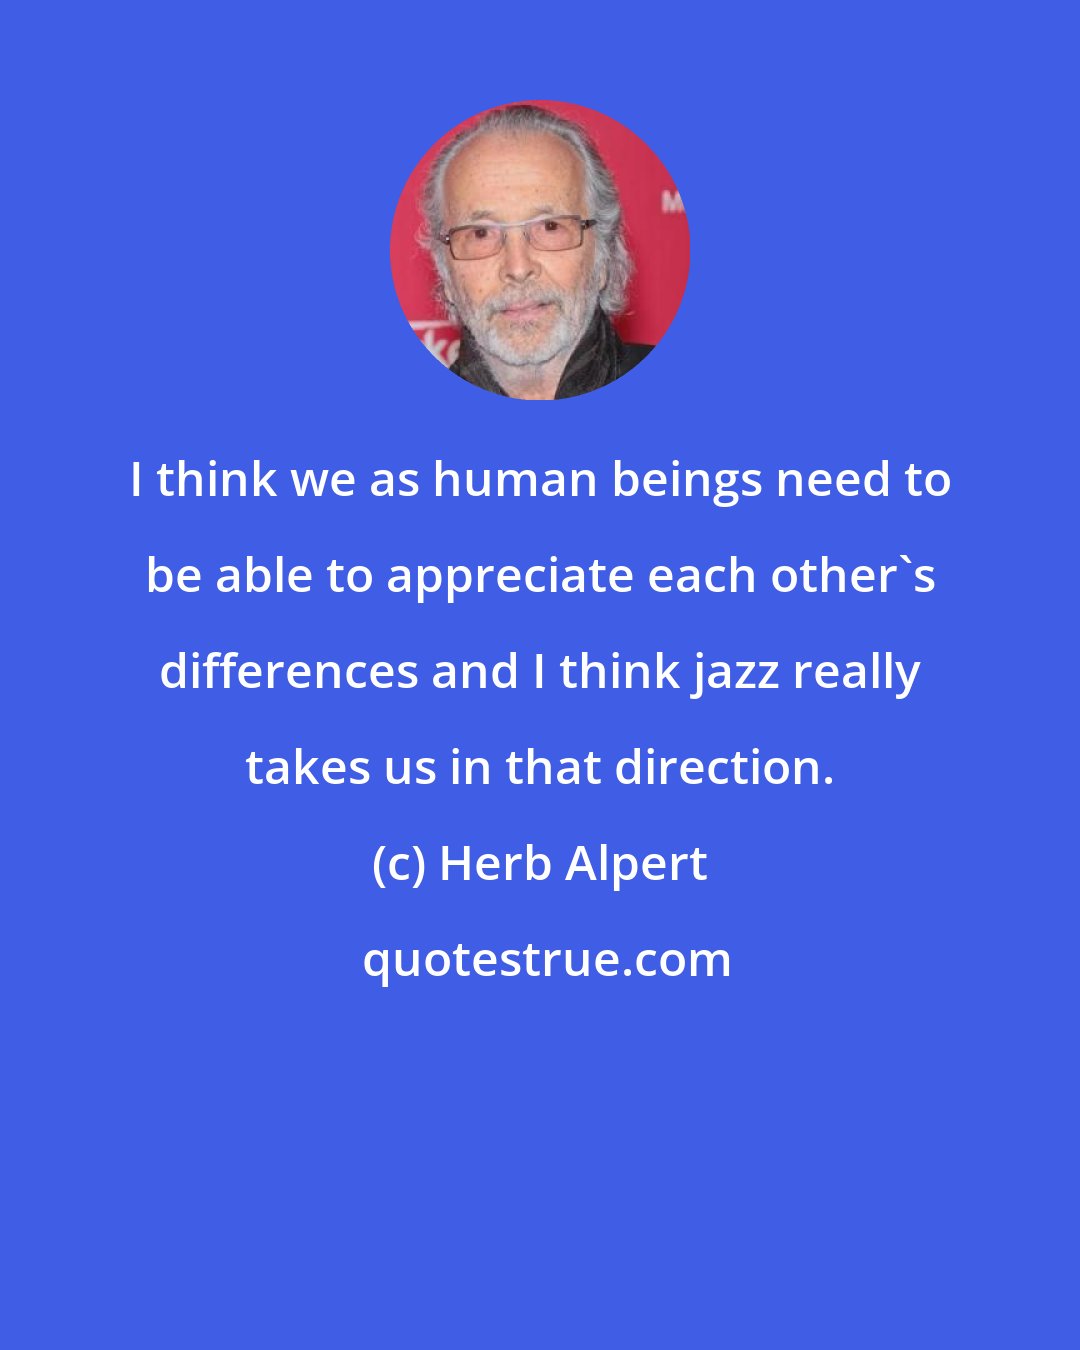 Herb Alpert: I think we as human beings need to be able to appreciate each other's differences and I think jazz really takes us in that direction.